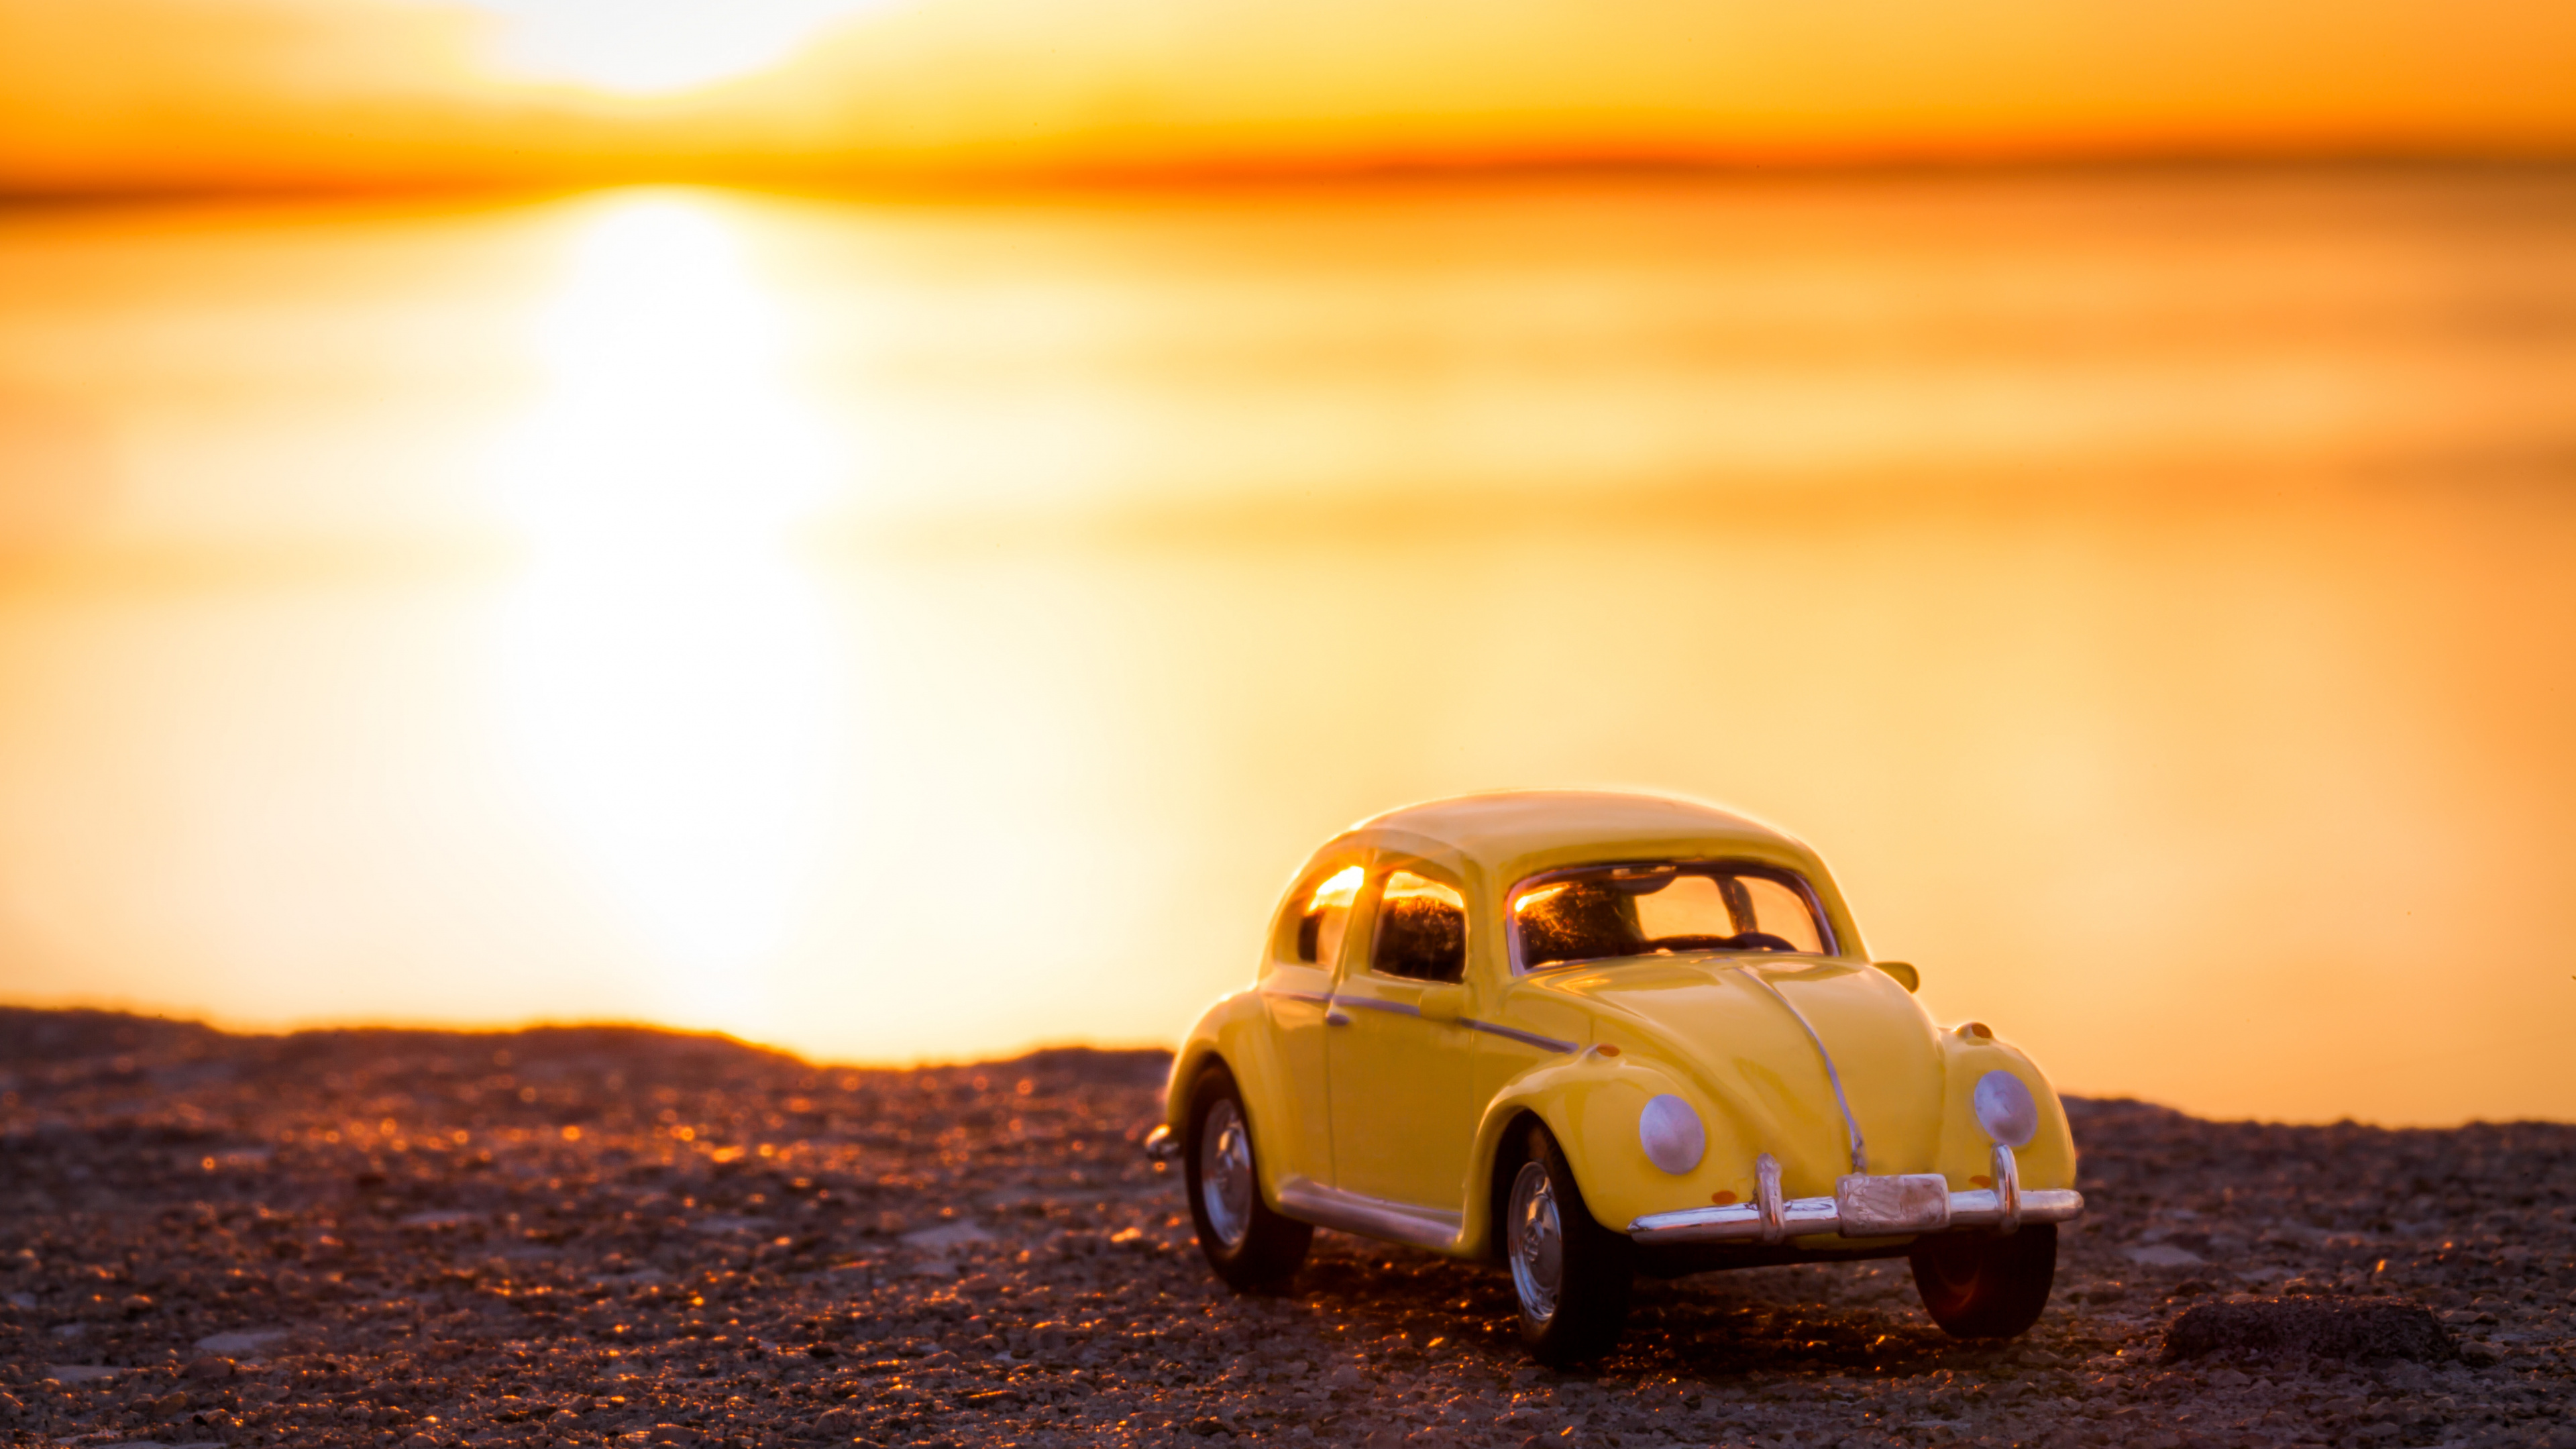 Yellow Volkswagen Beetle on Shore During Sunset. Wallpaper in 3840x2160 Resolution